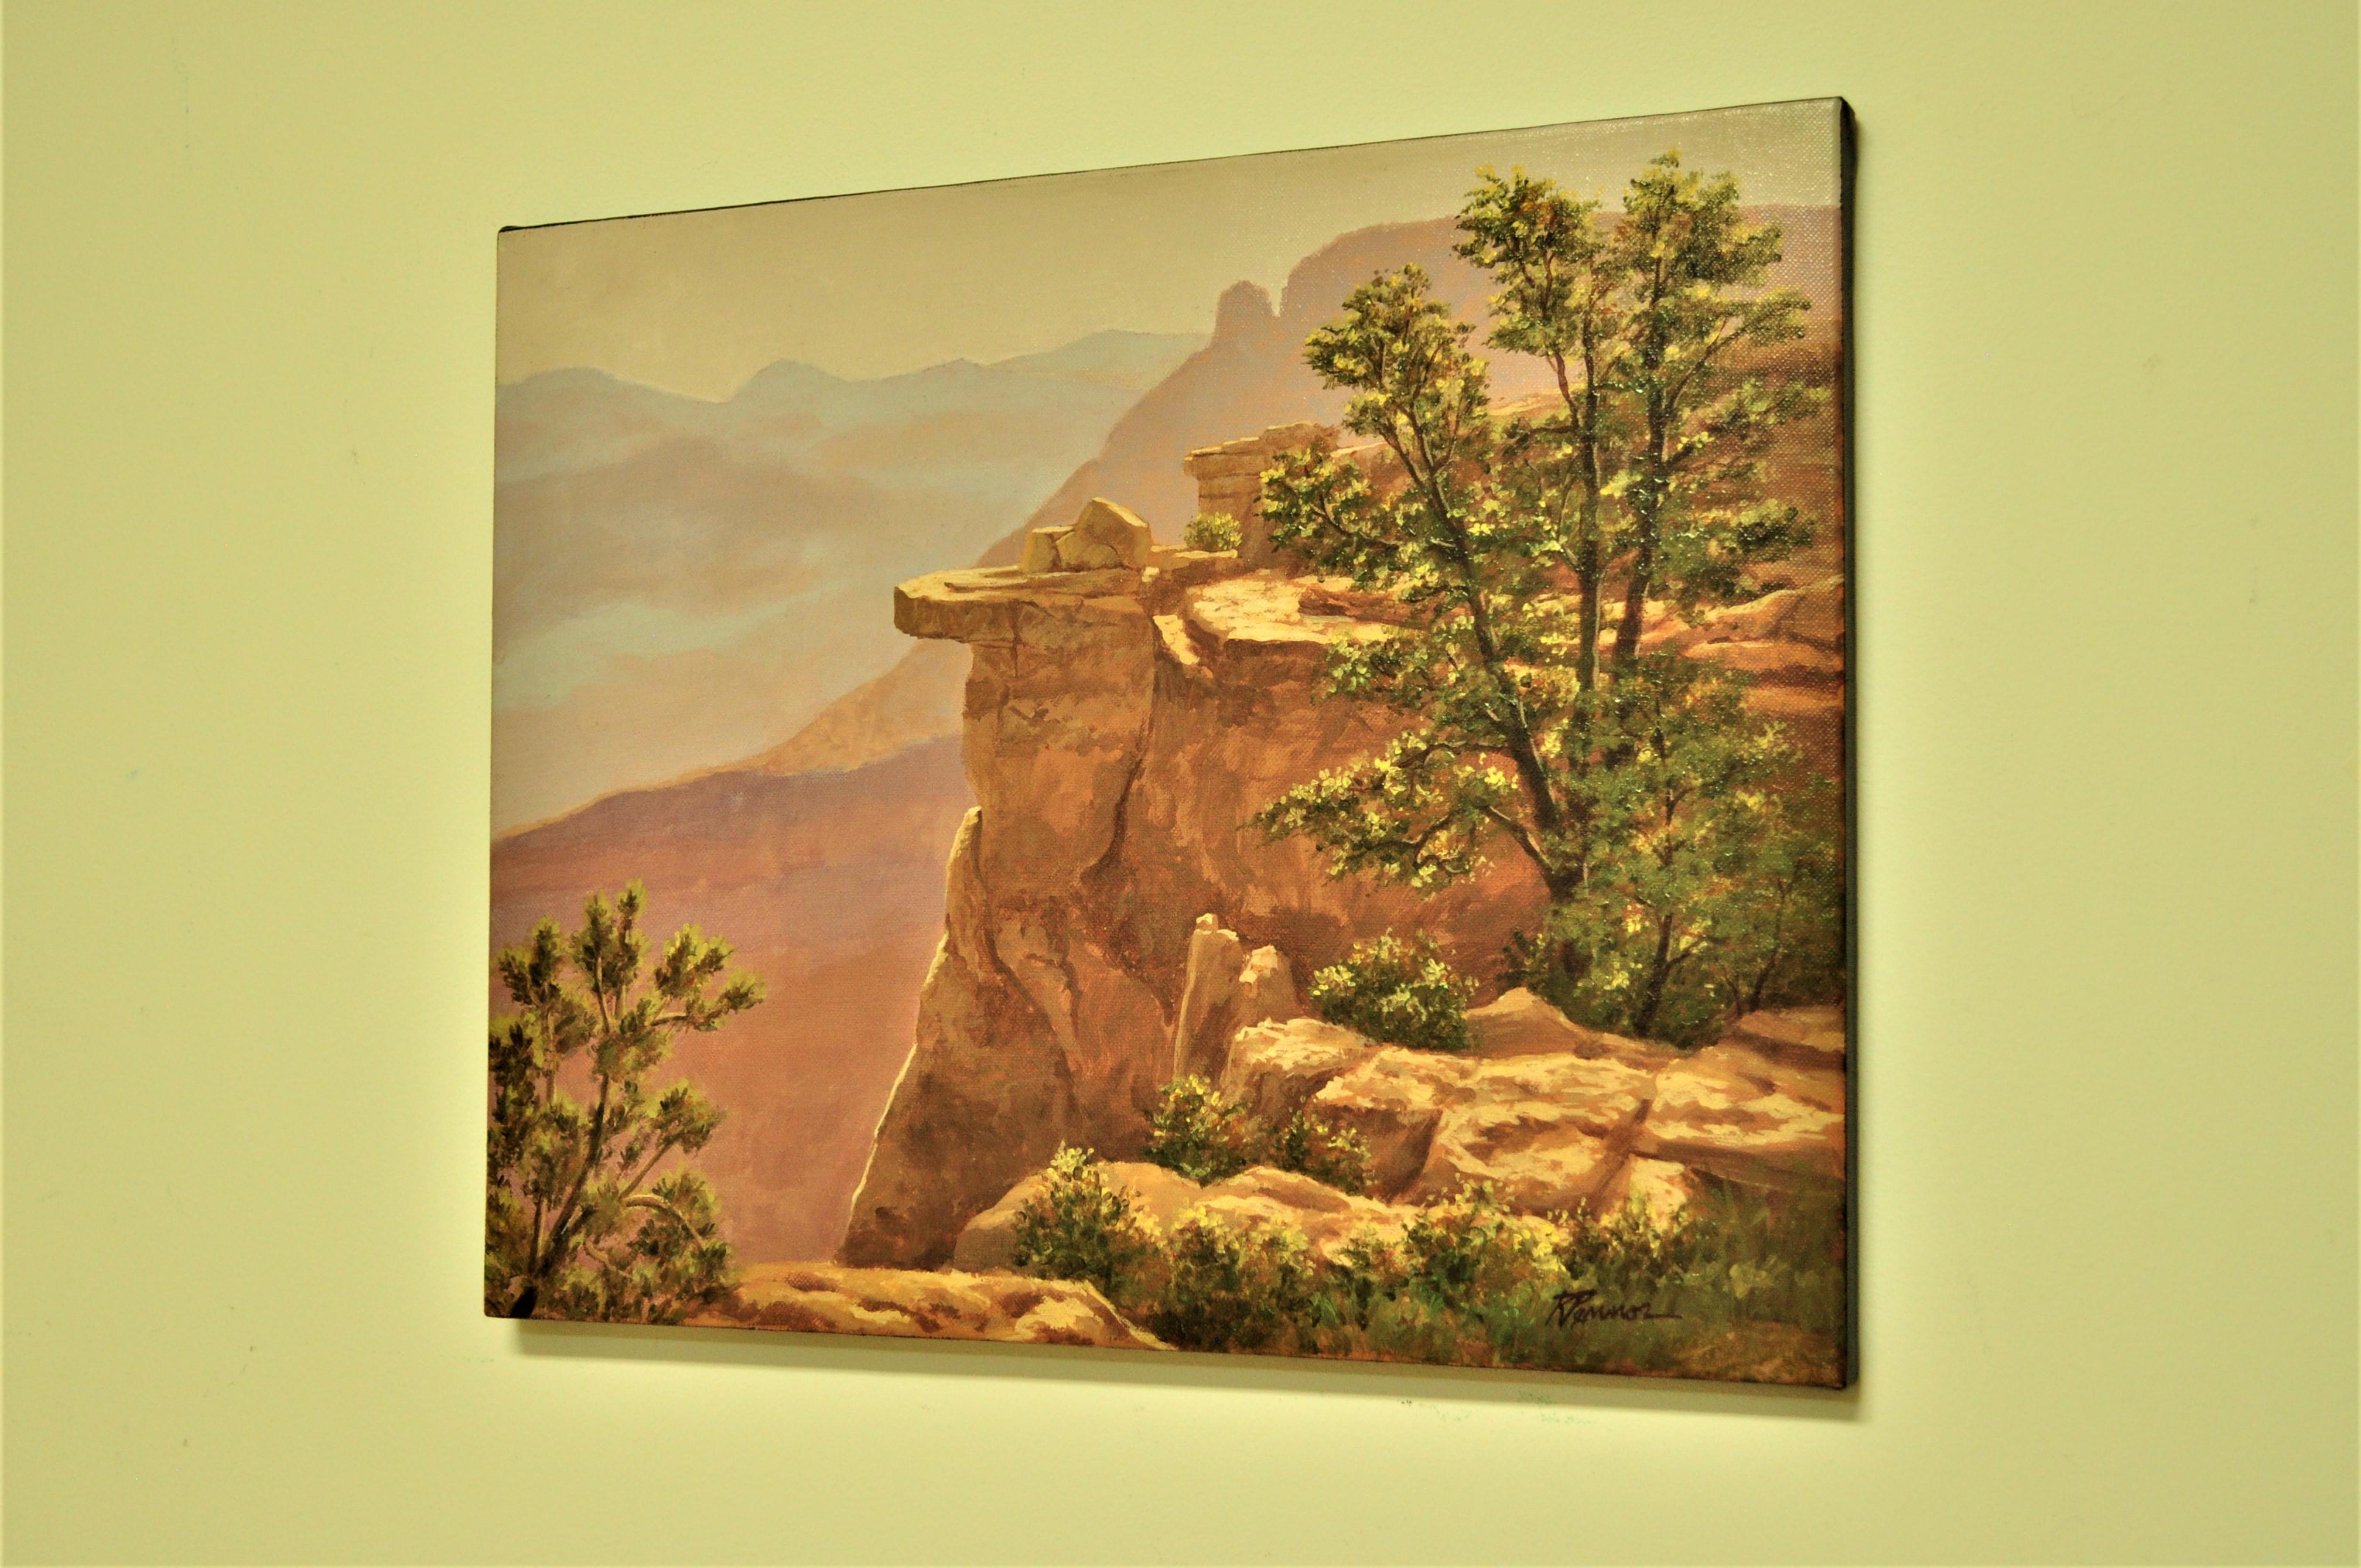 South Rim View, Grand Canyon - Painting by Robert Pennor